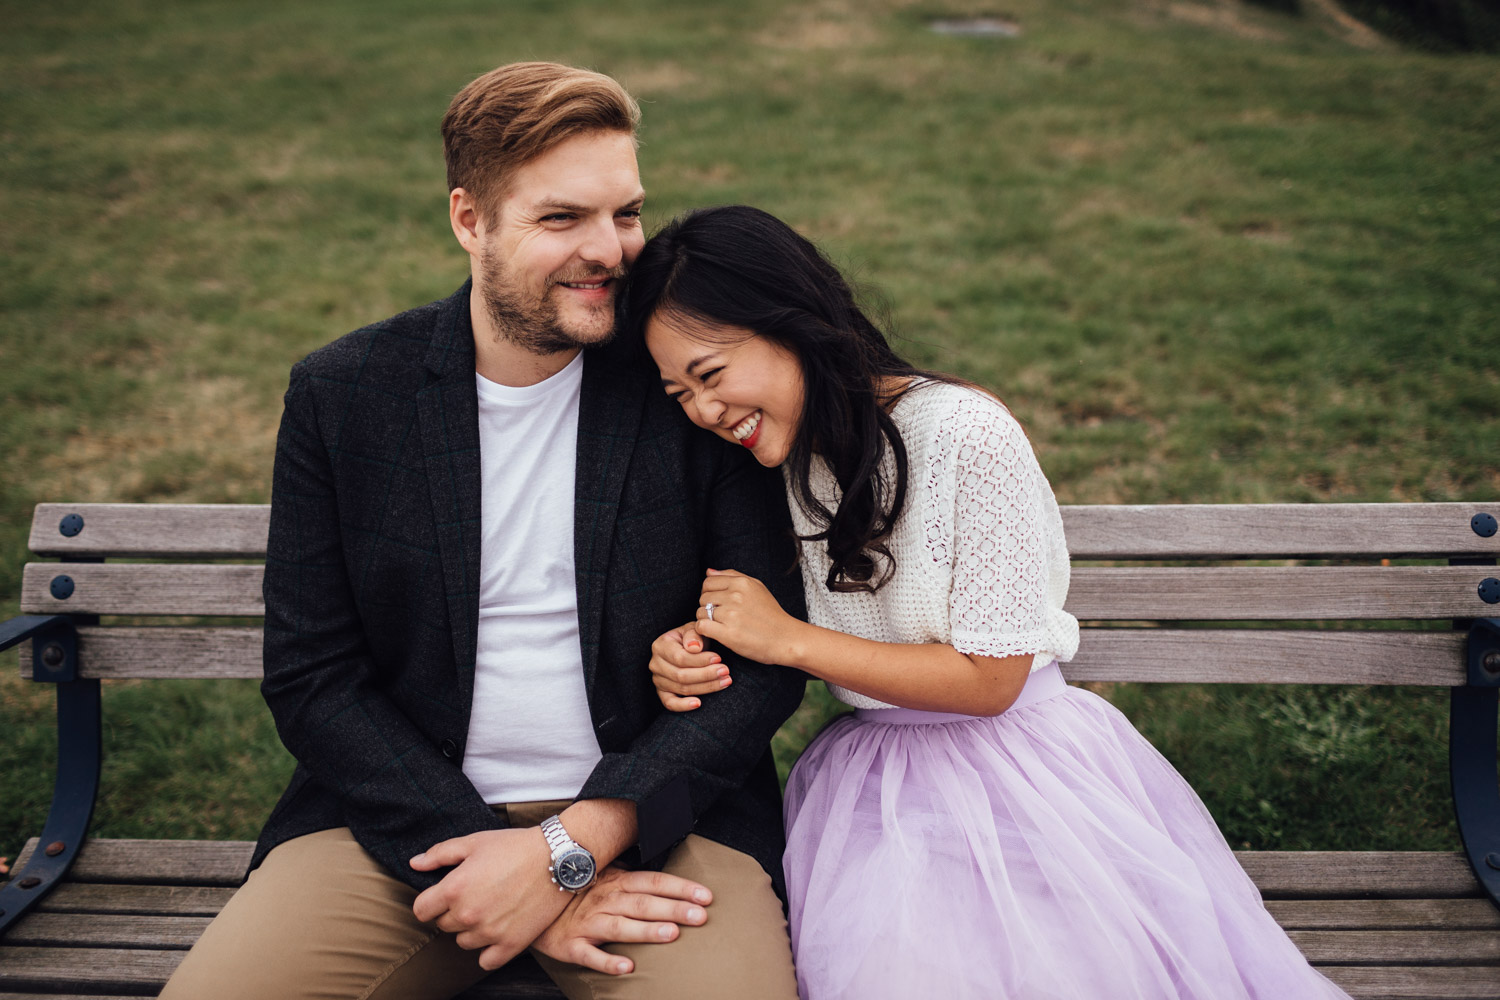 north vancouver couple sitting on bench laughing candid engagement photography pinterest